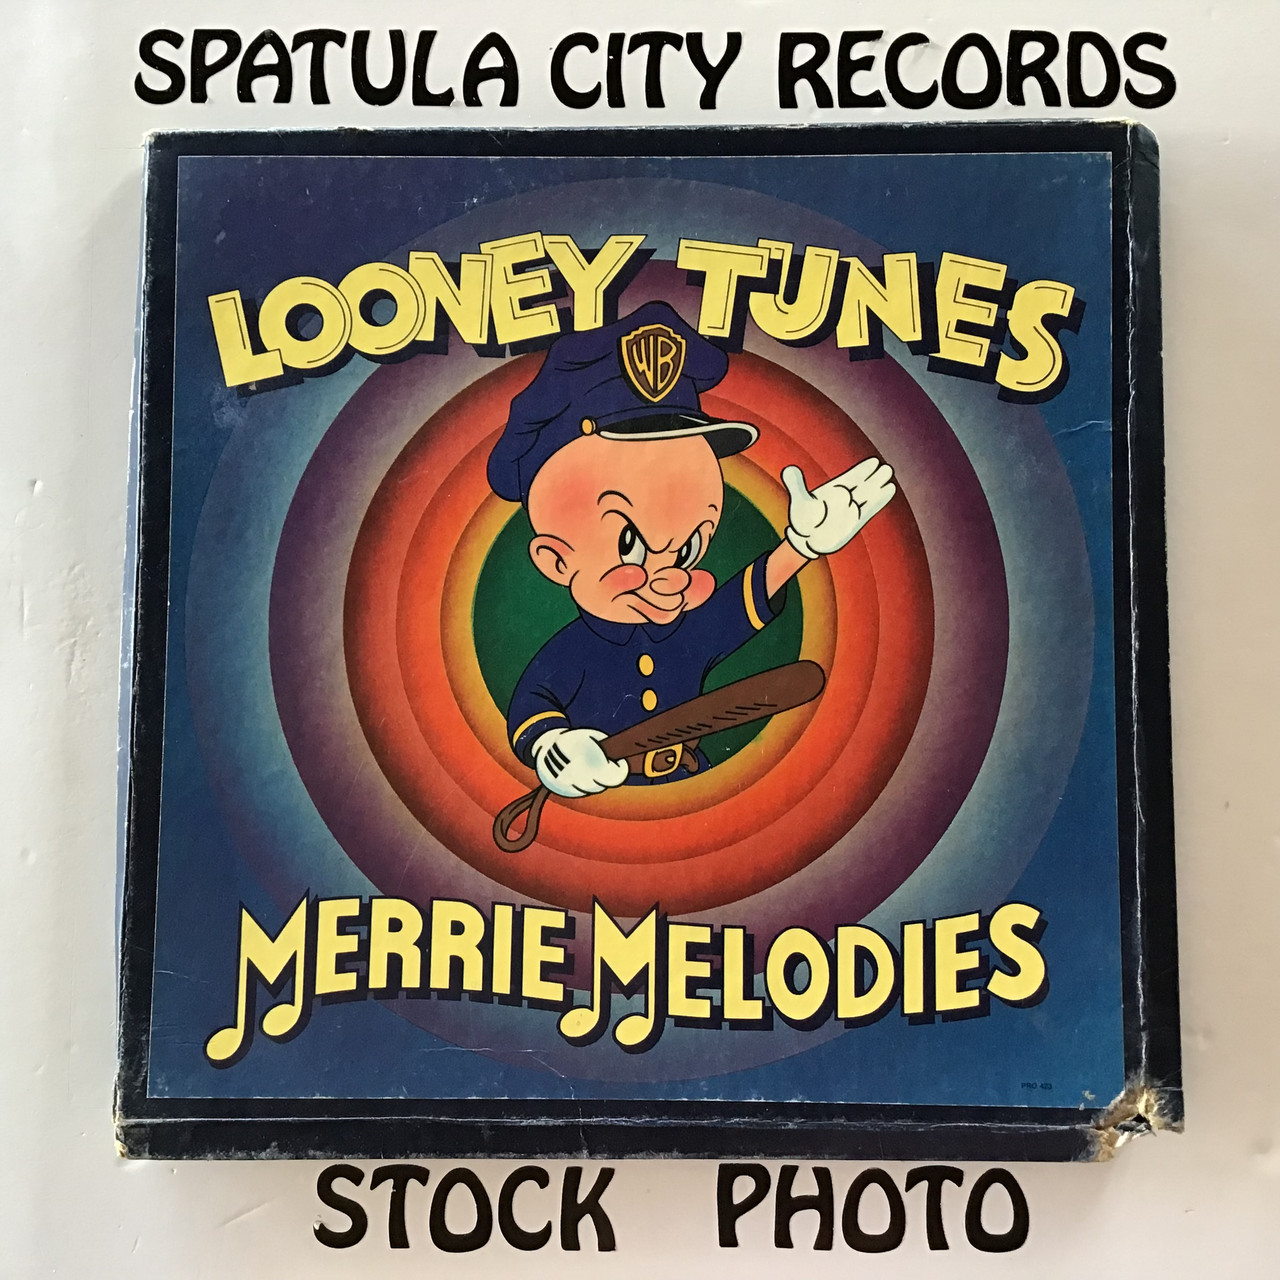 Looney Tunes and Merrie Melodies - compilation - triple vinyl record LP